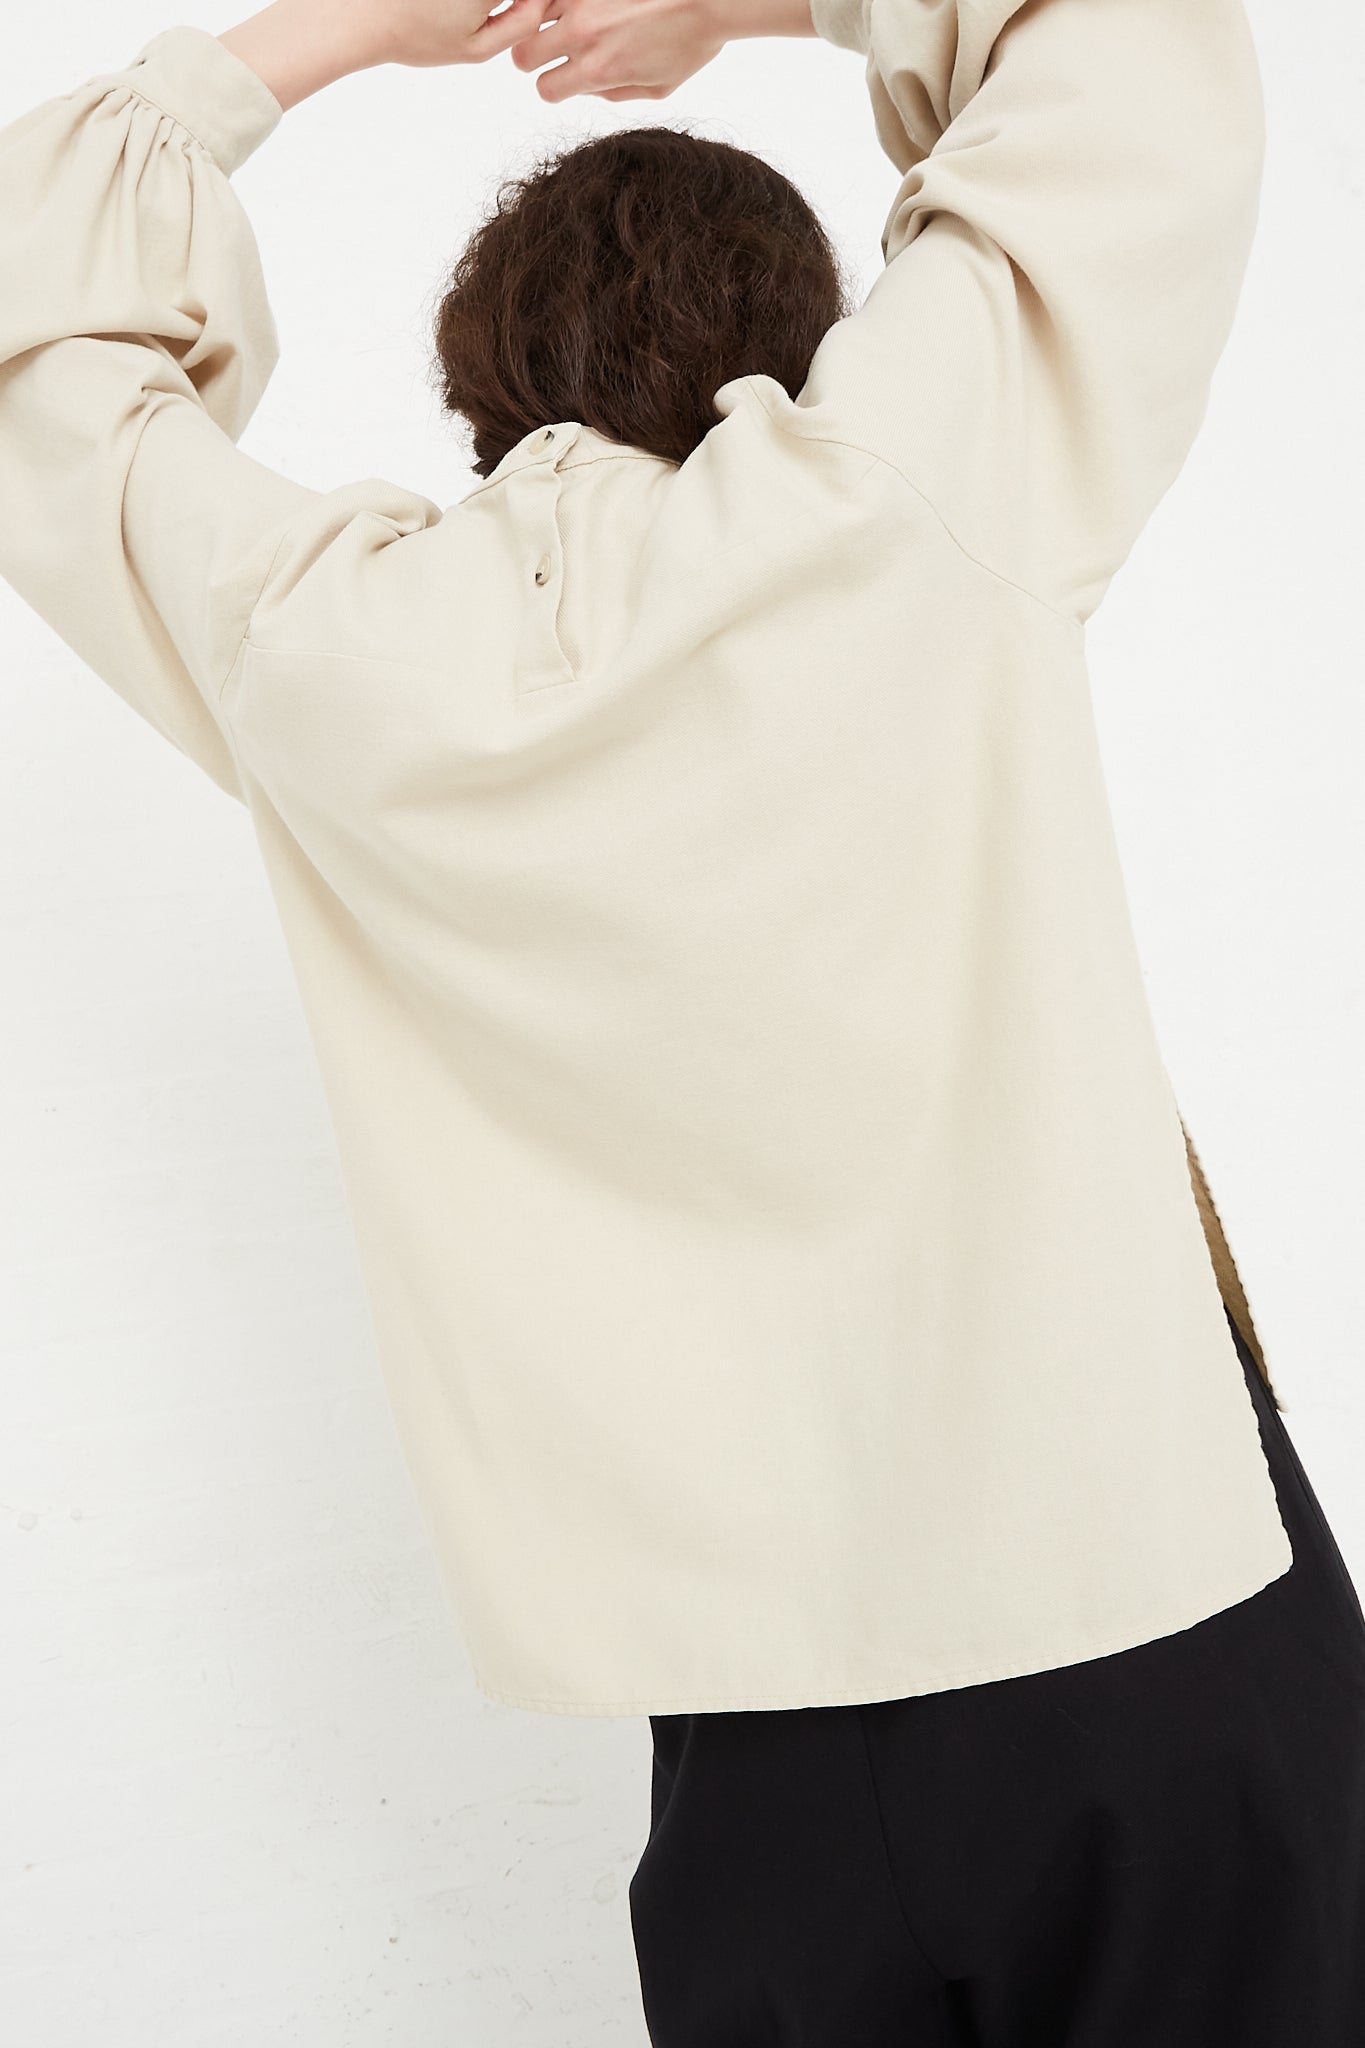 The model is wearing a Black Crane Cotton Twill Puff Sleeve Blouse in Ivory with long sleeves. Back view. Model's arms are raised above head.